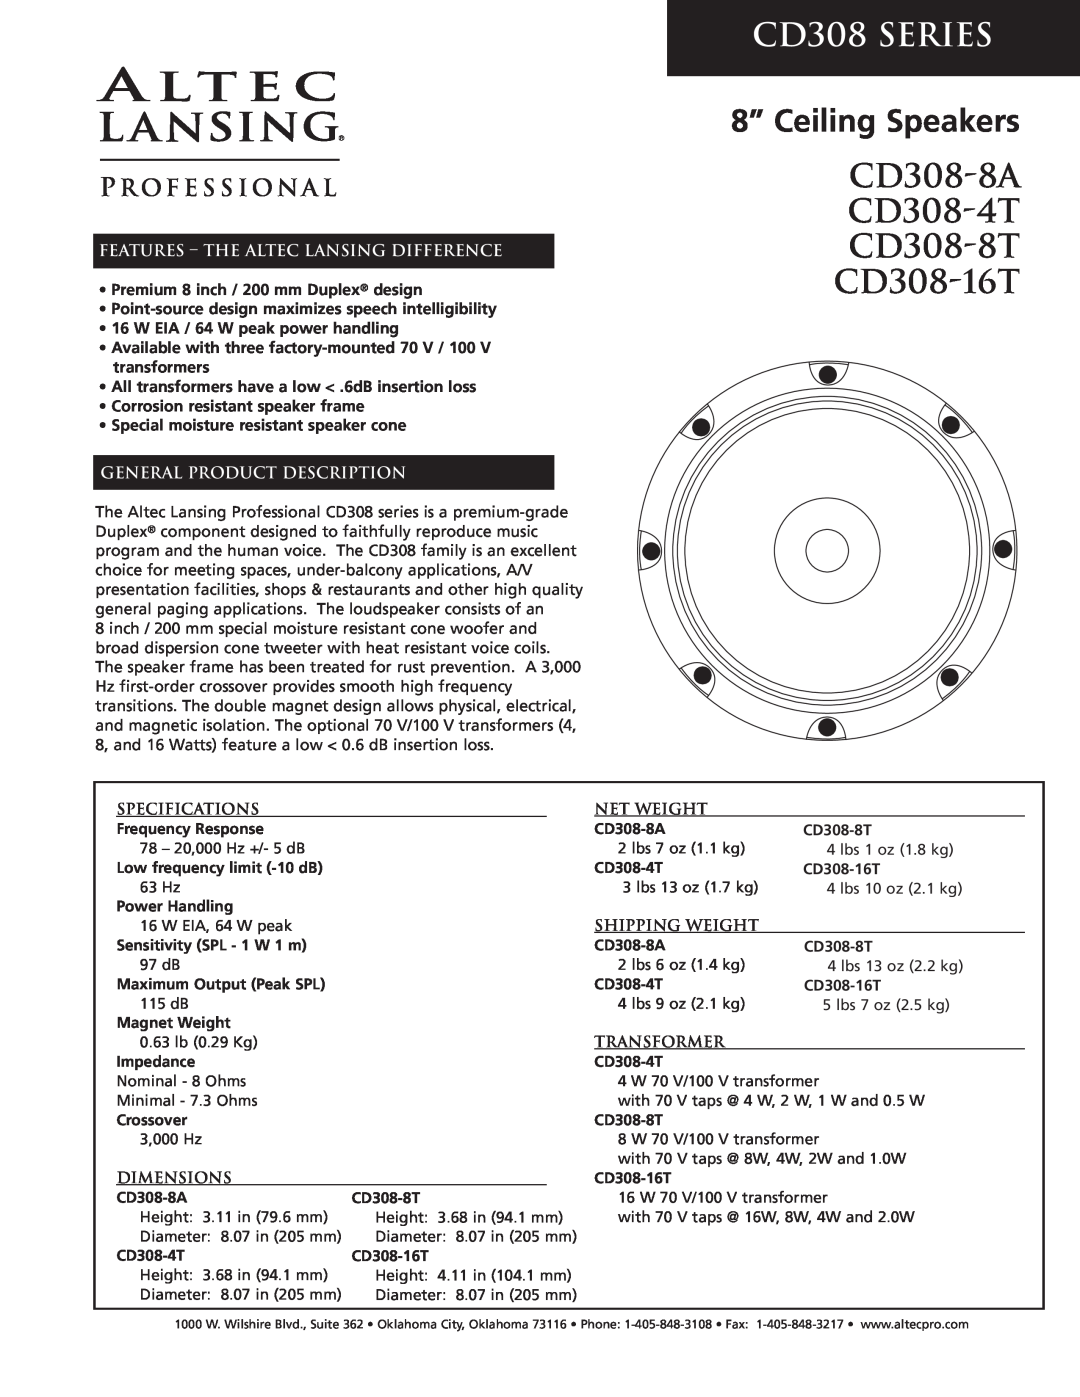 Altec Lansing CD308-4T specifications Specifications, Net Weight, Shipping Weight, Transformer, Dimensions, CD308 SERIES 